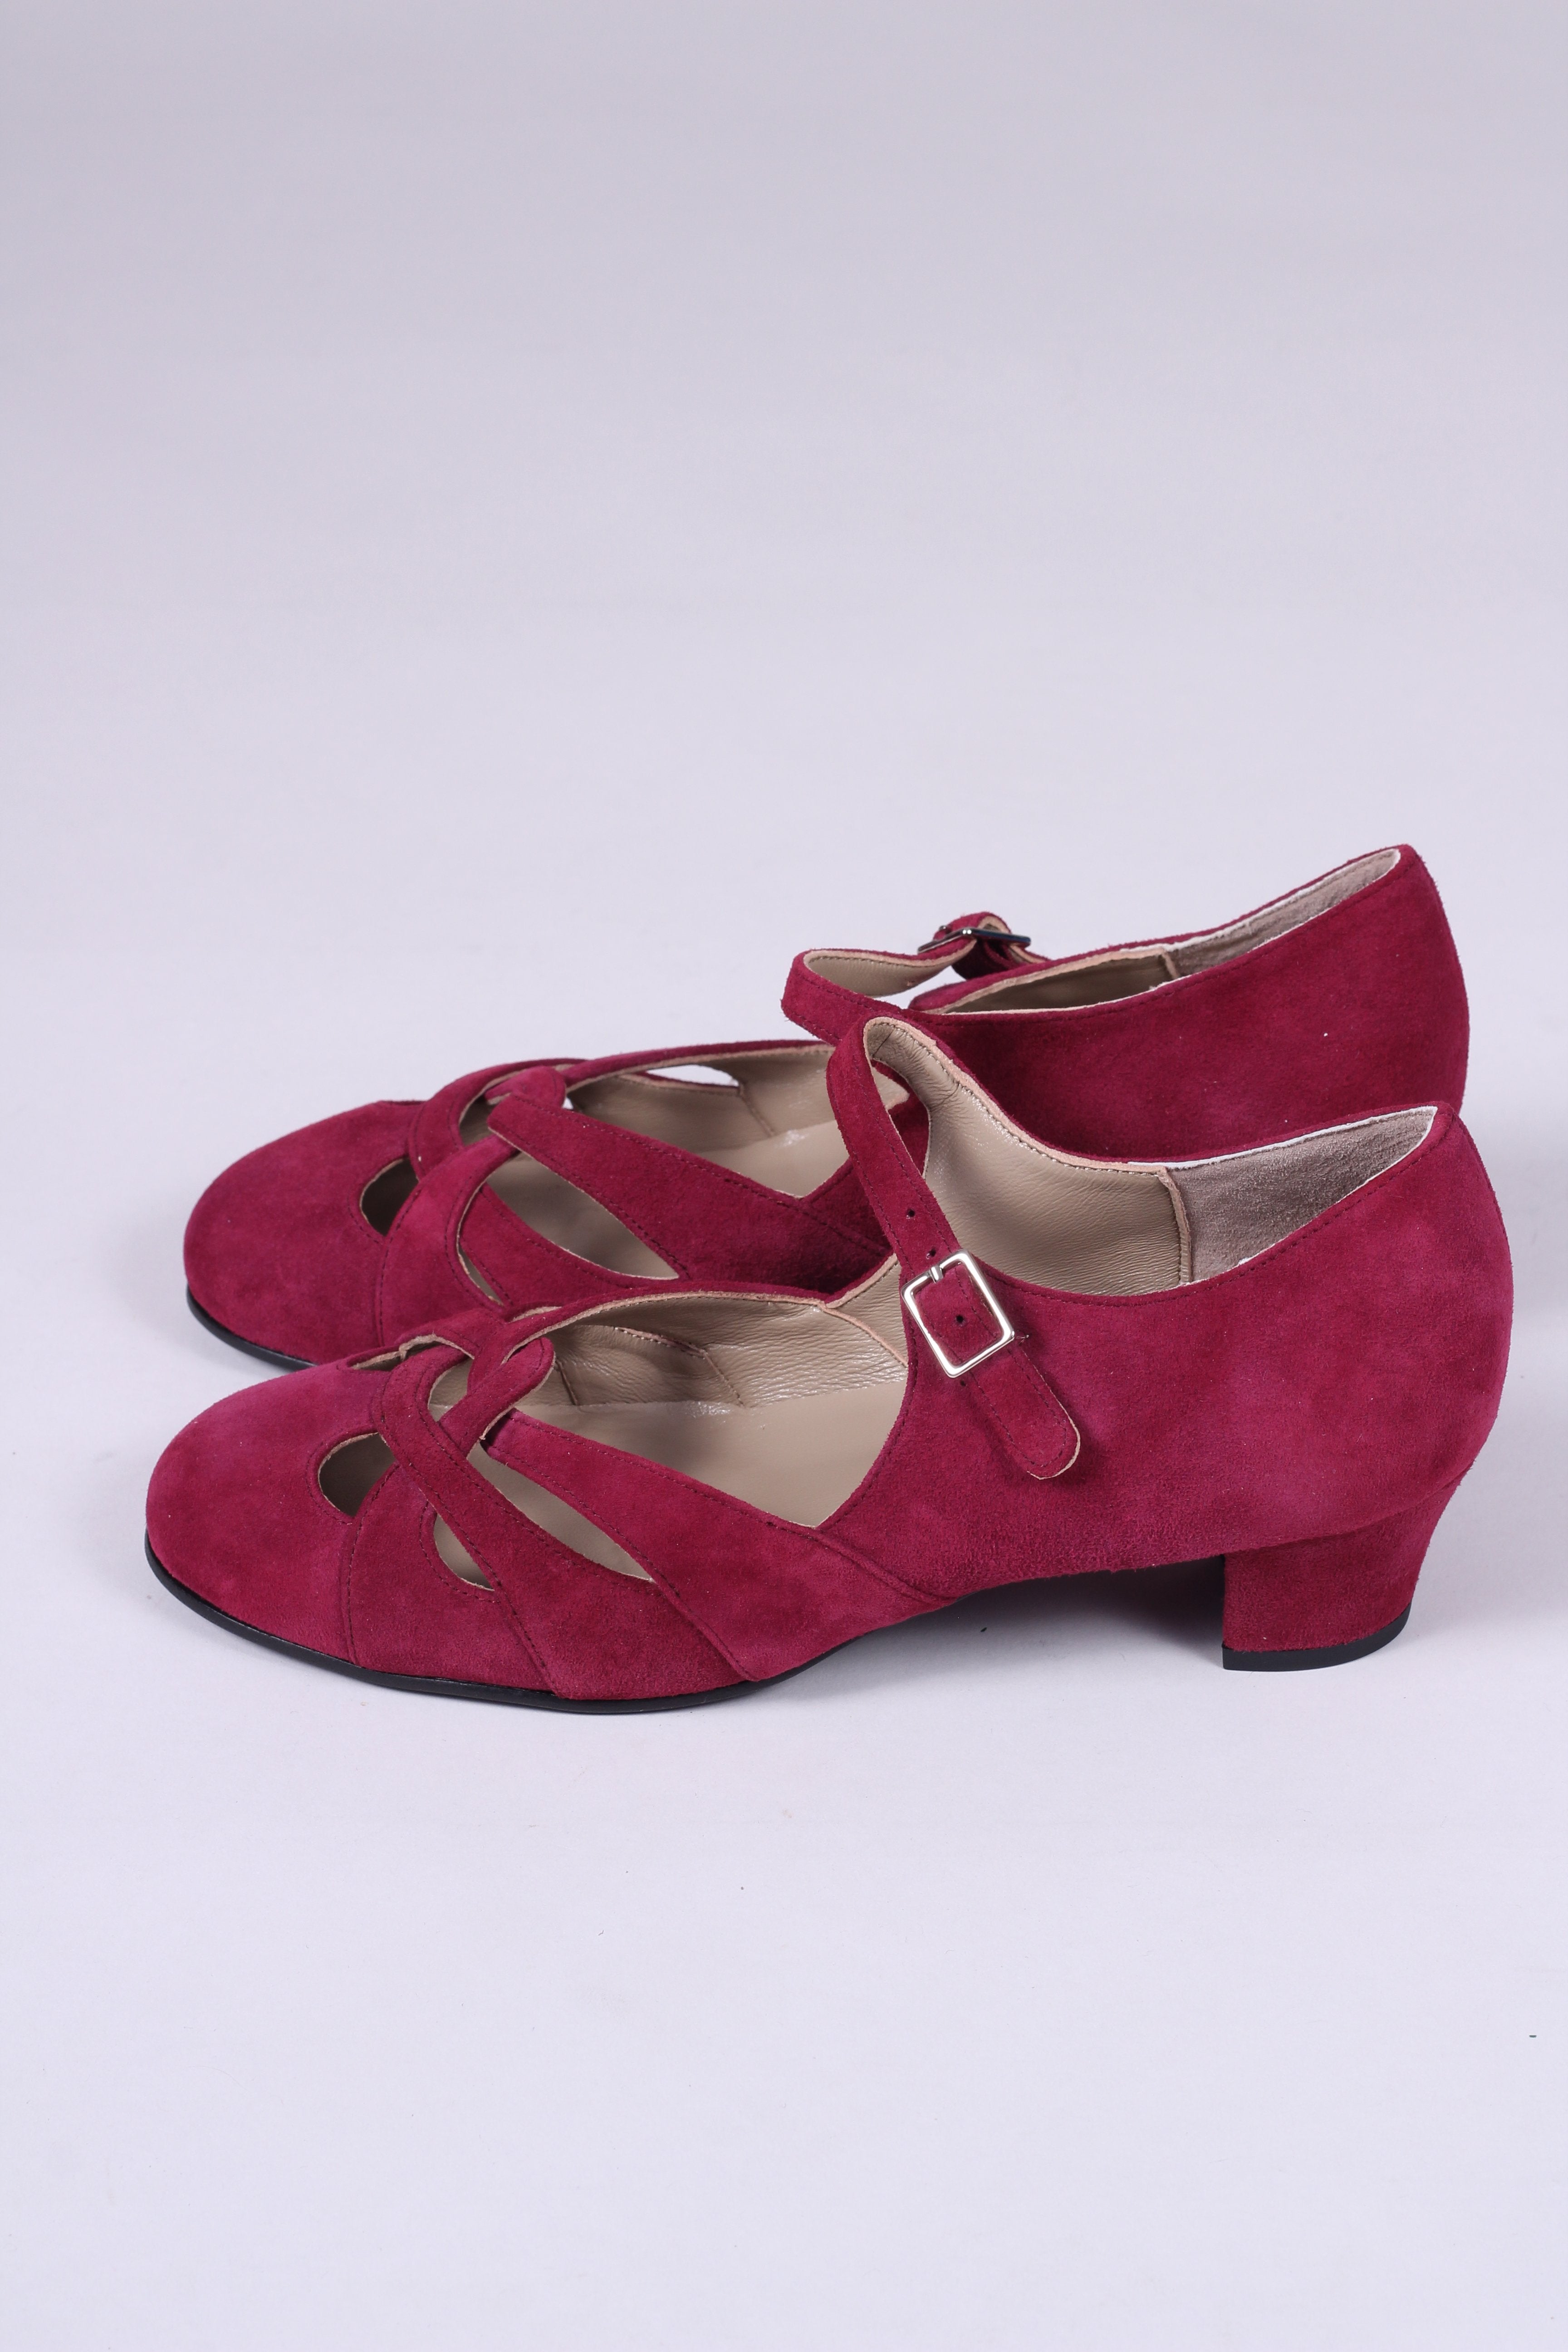 Everyday 1930s /1940s style suede sandals - Burgundy red - Ida